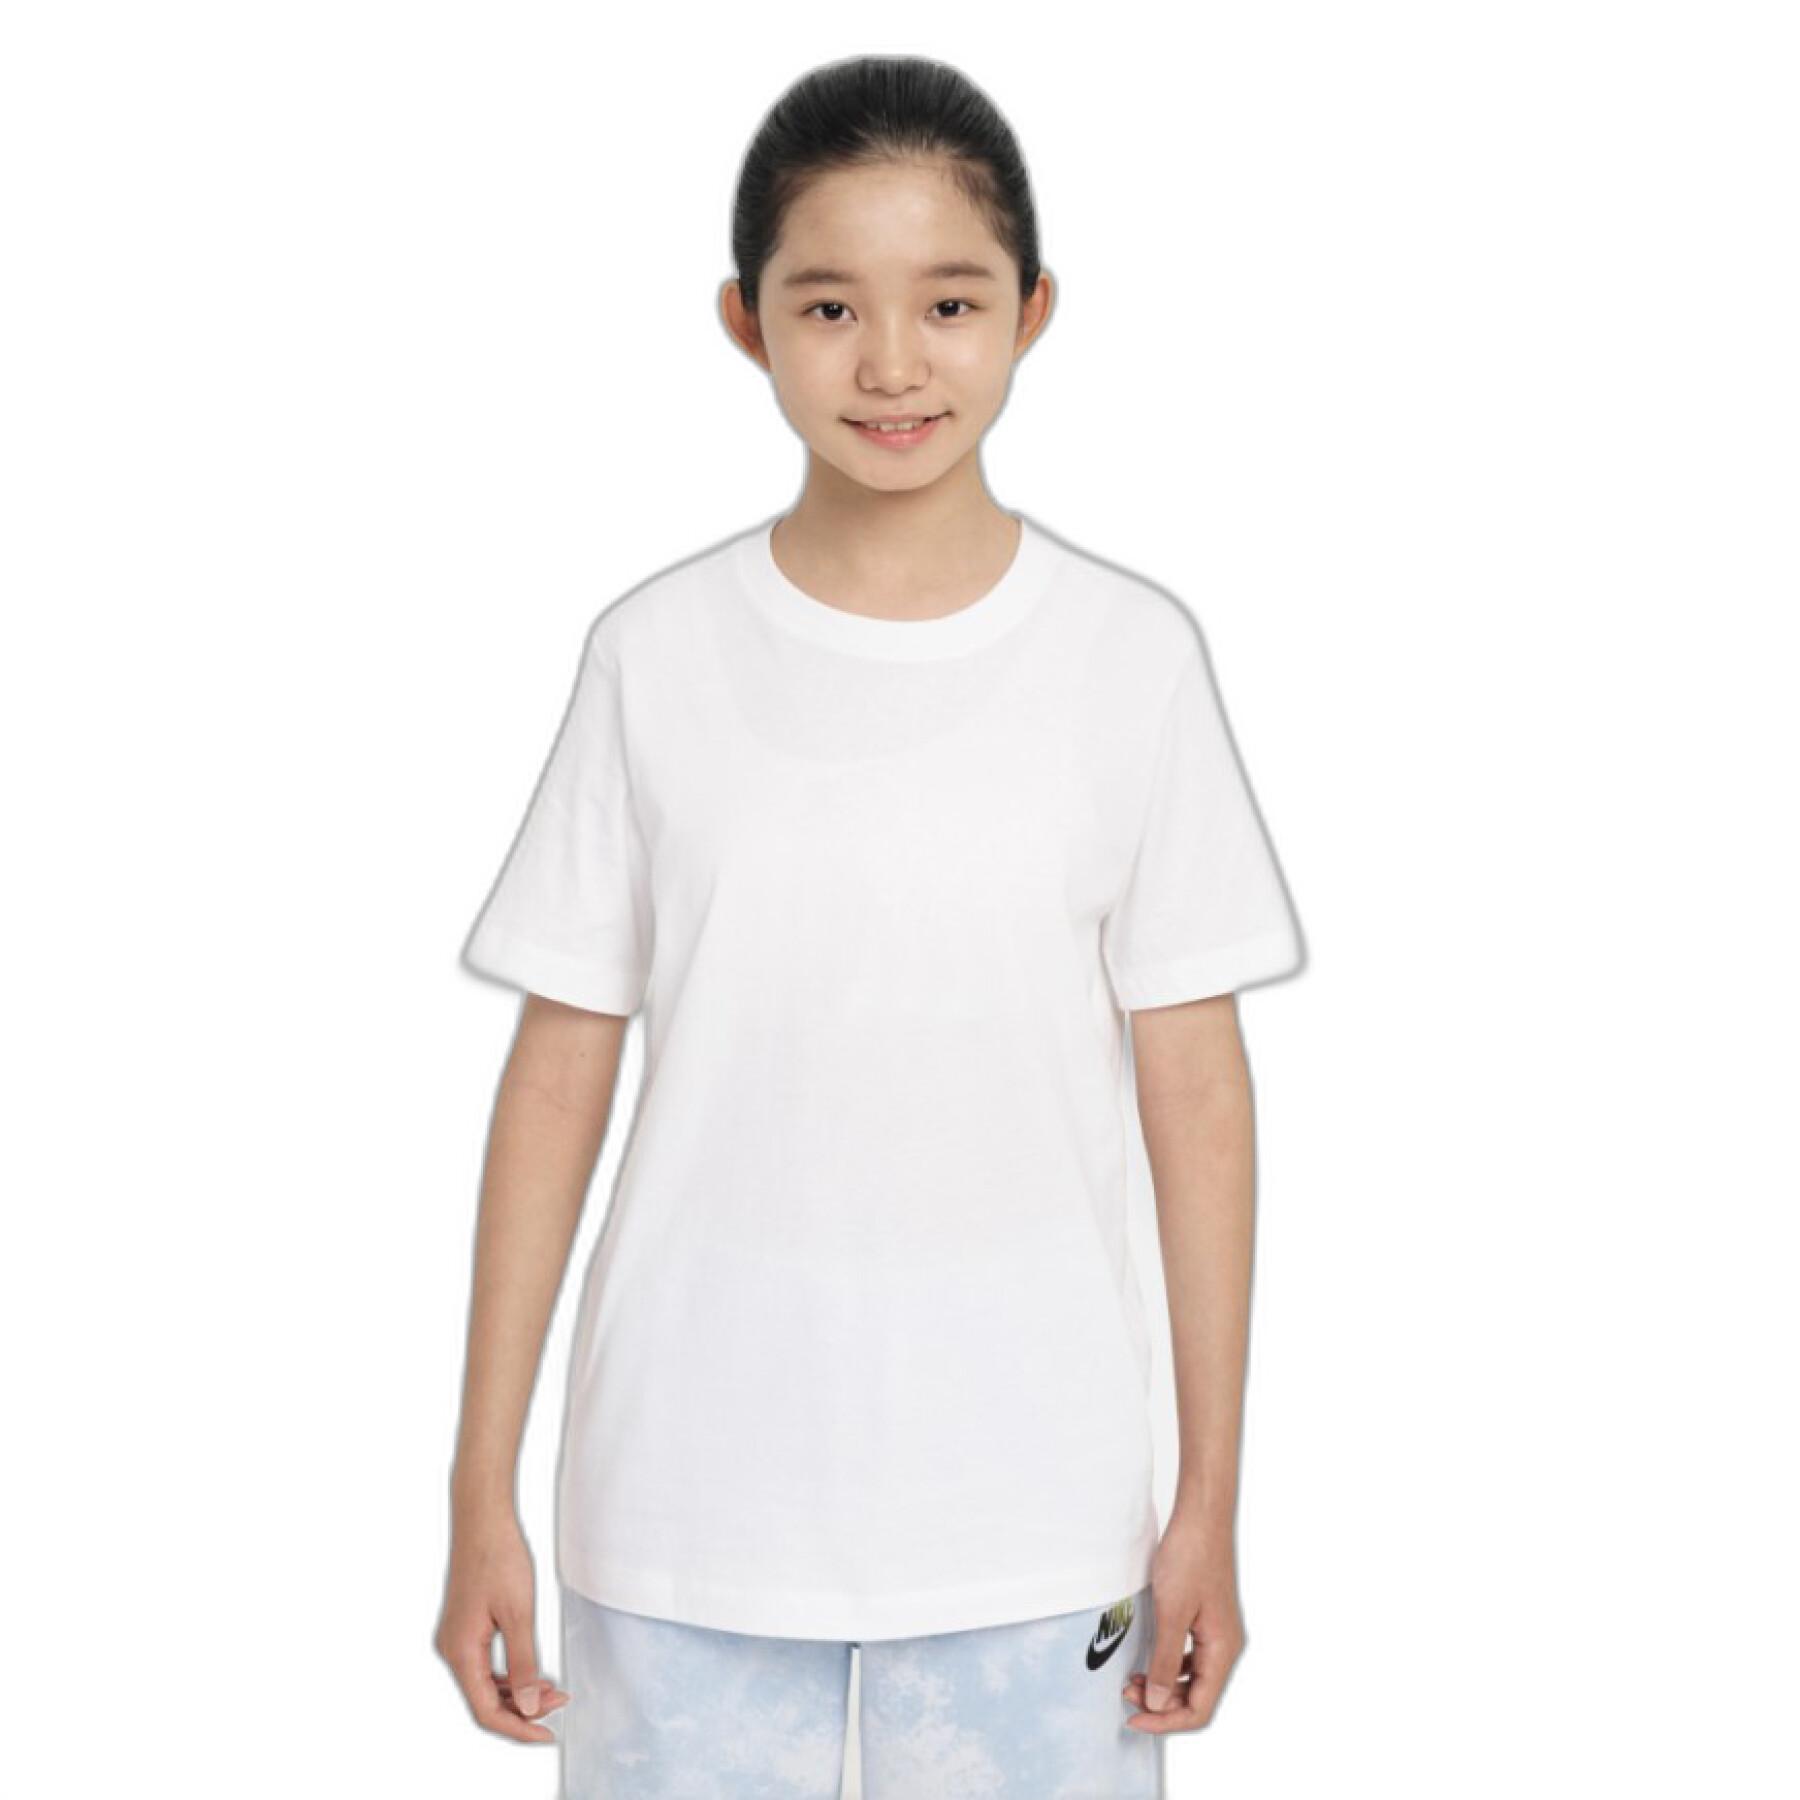 Child's T-shirt Nike By You